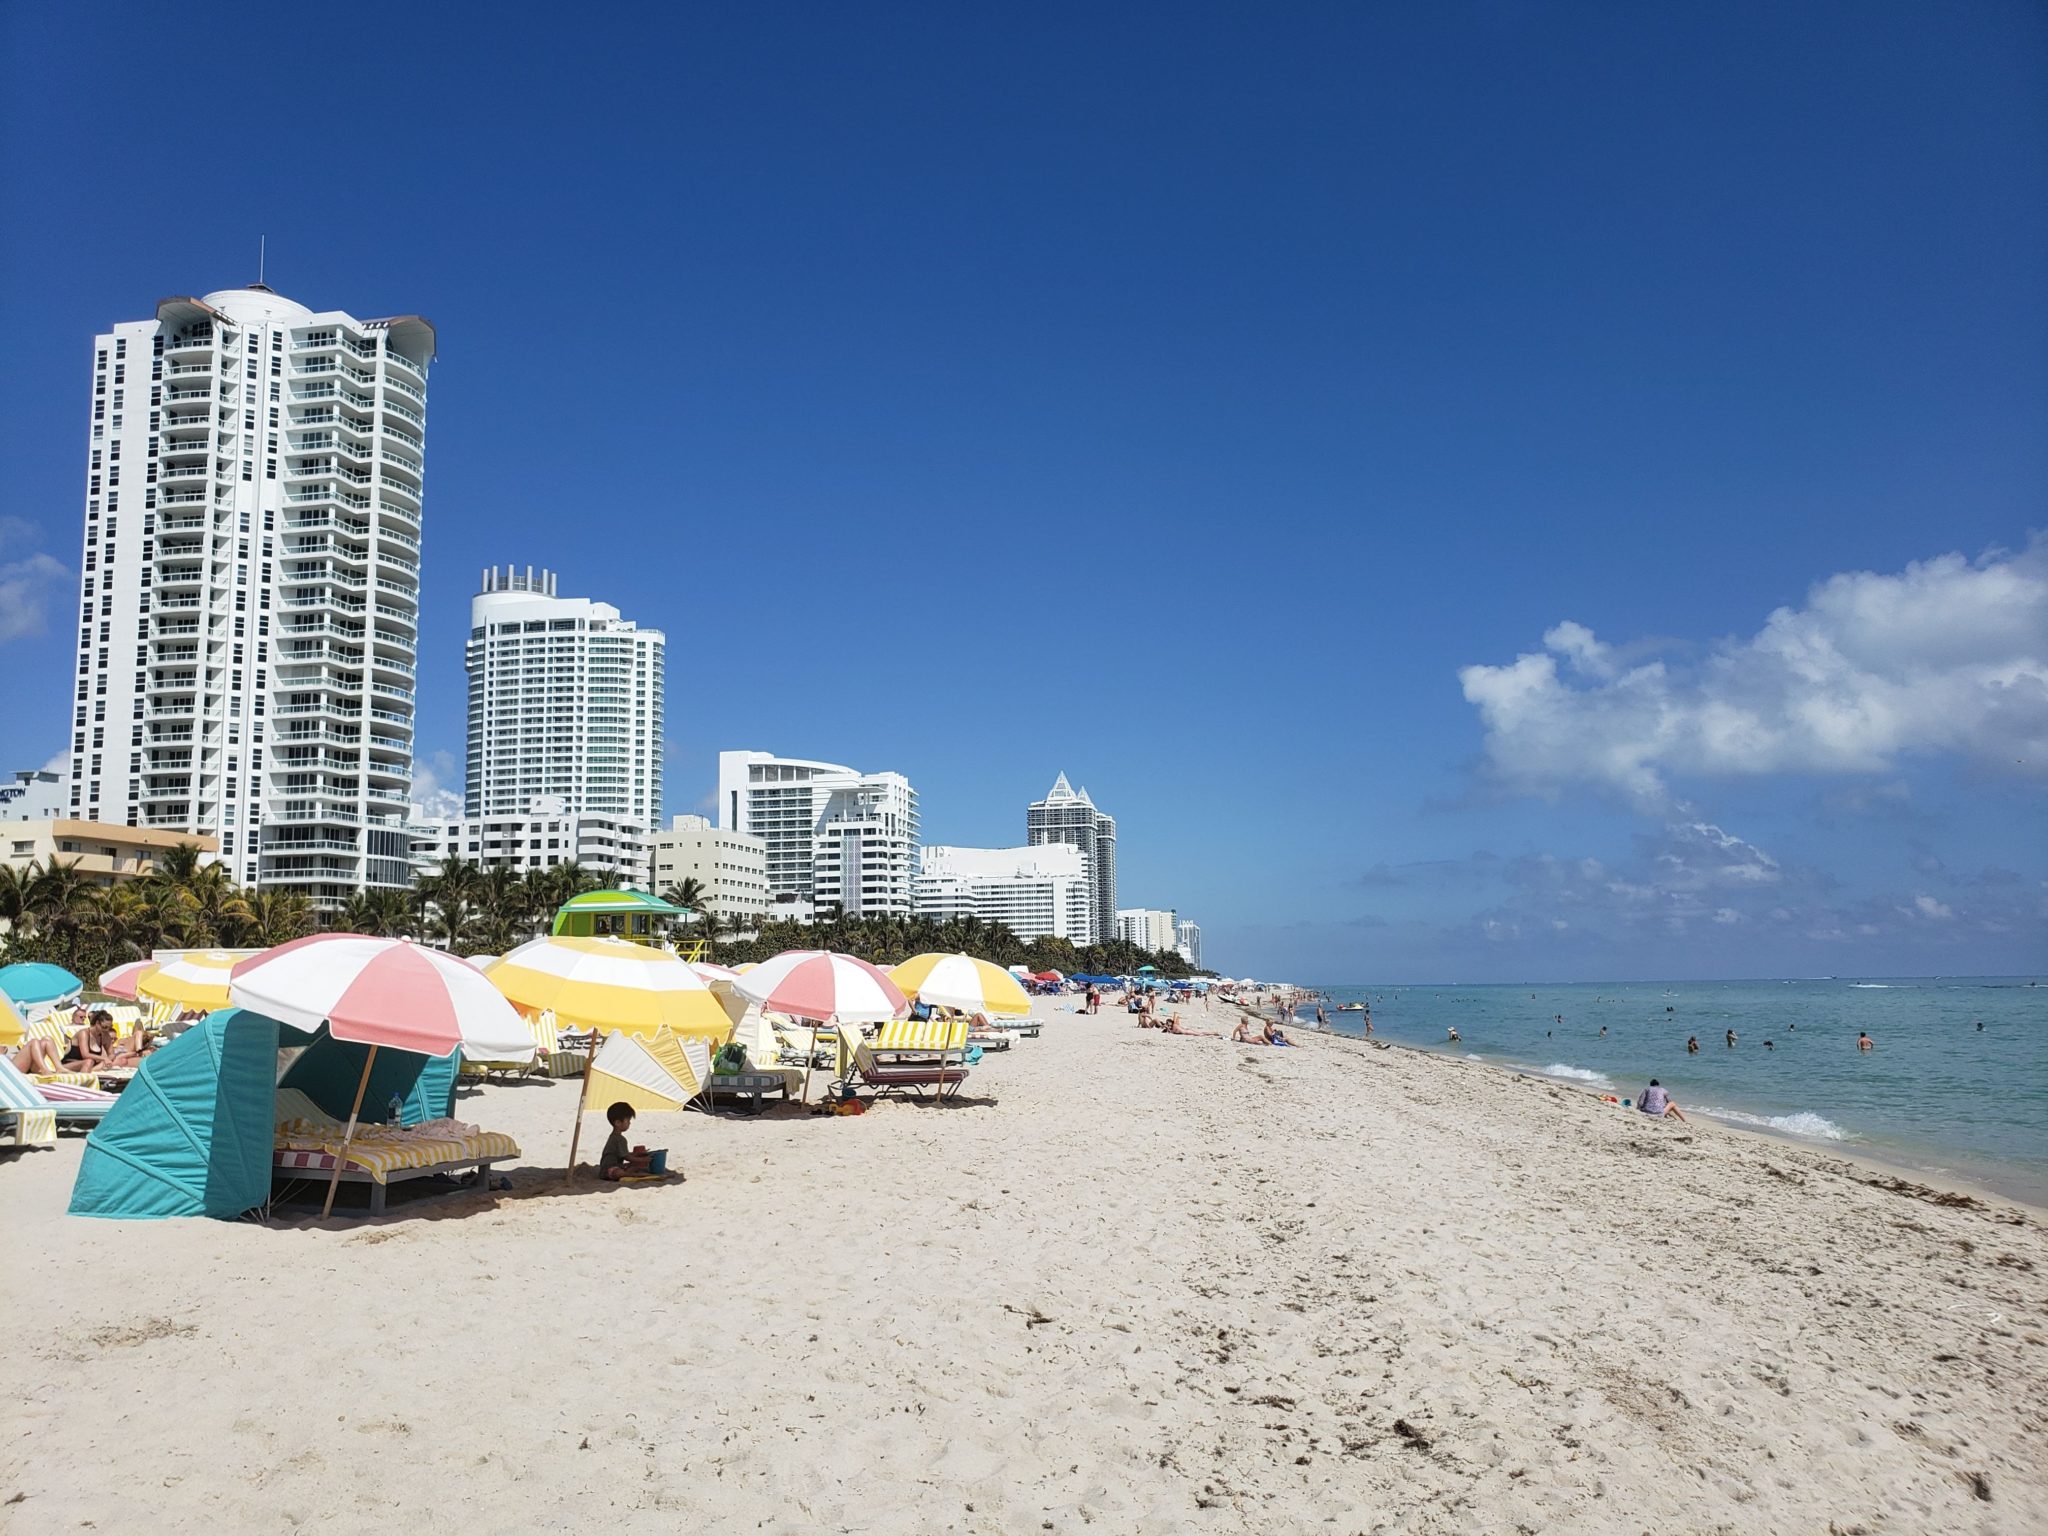 a beach with umbrellas and buildings in the background